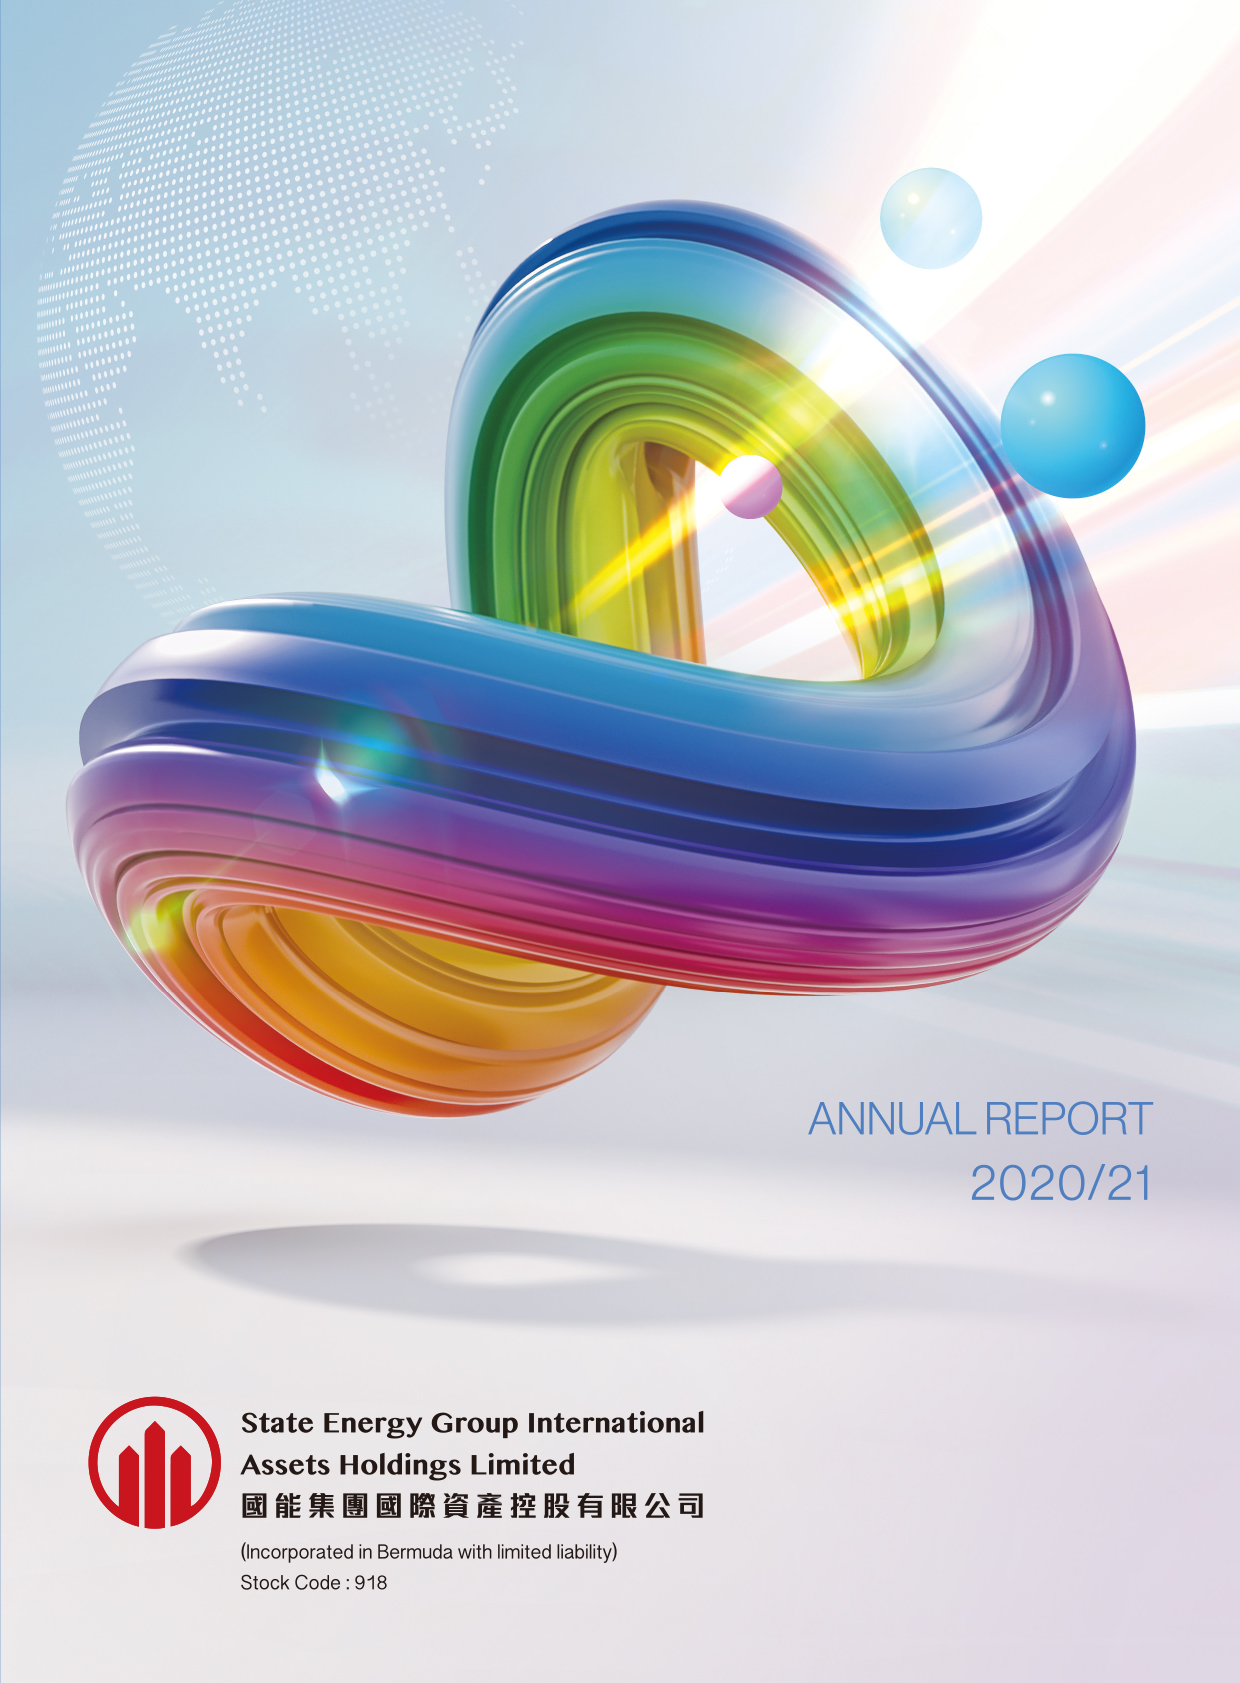 State Energy Group International Assets Holdings Limited